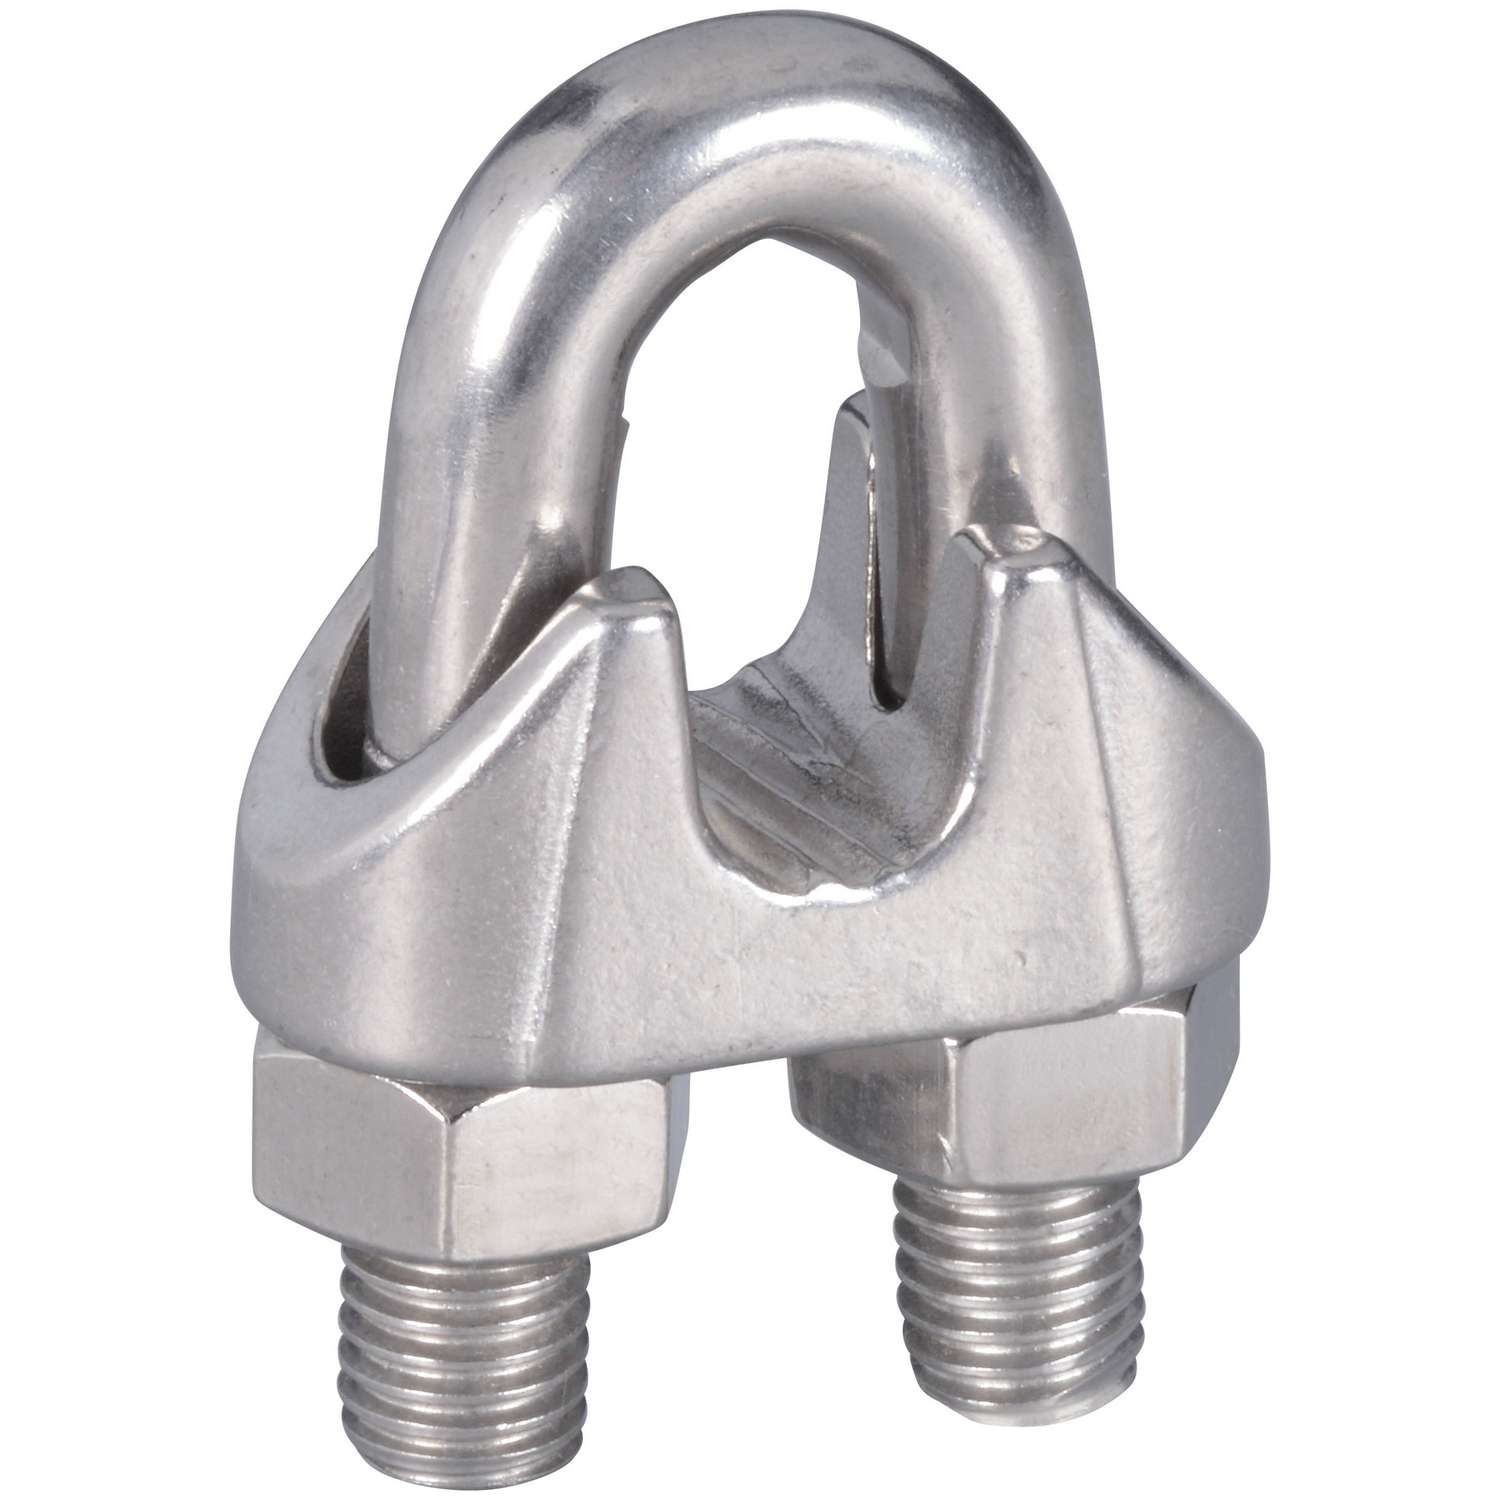  National  Hardware  Stainless Steel Wire Cable Clamps Ace  